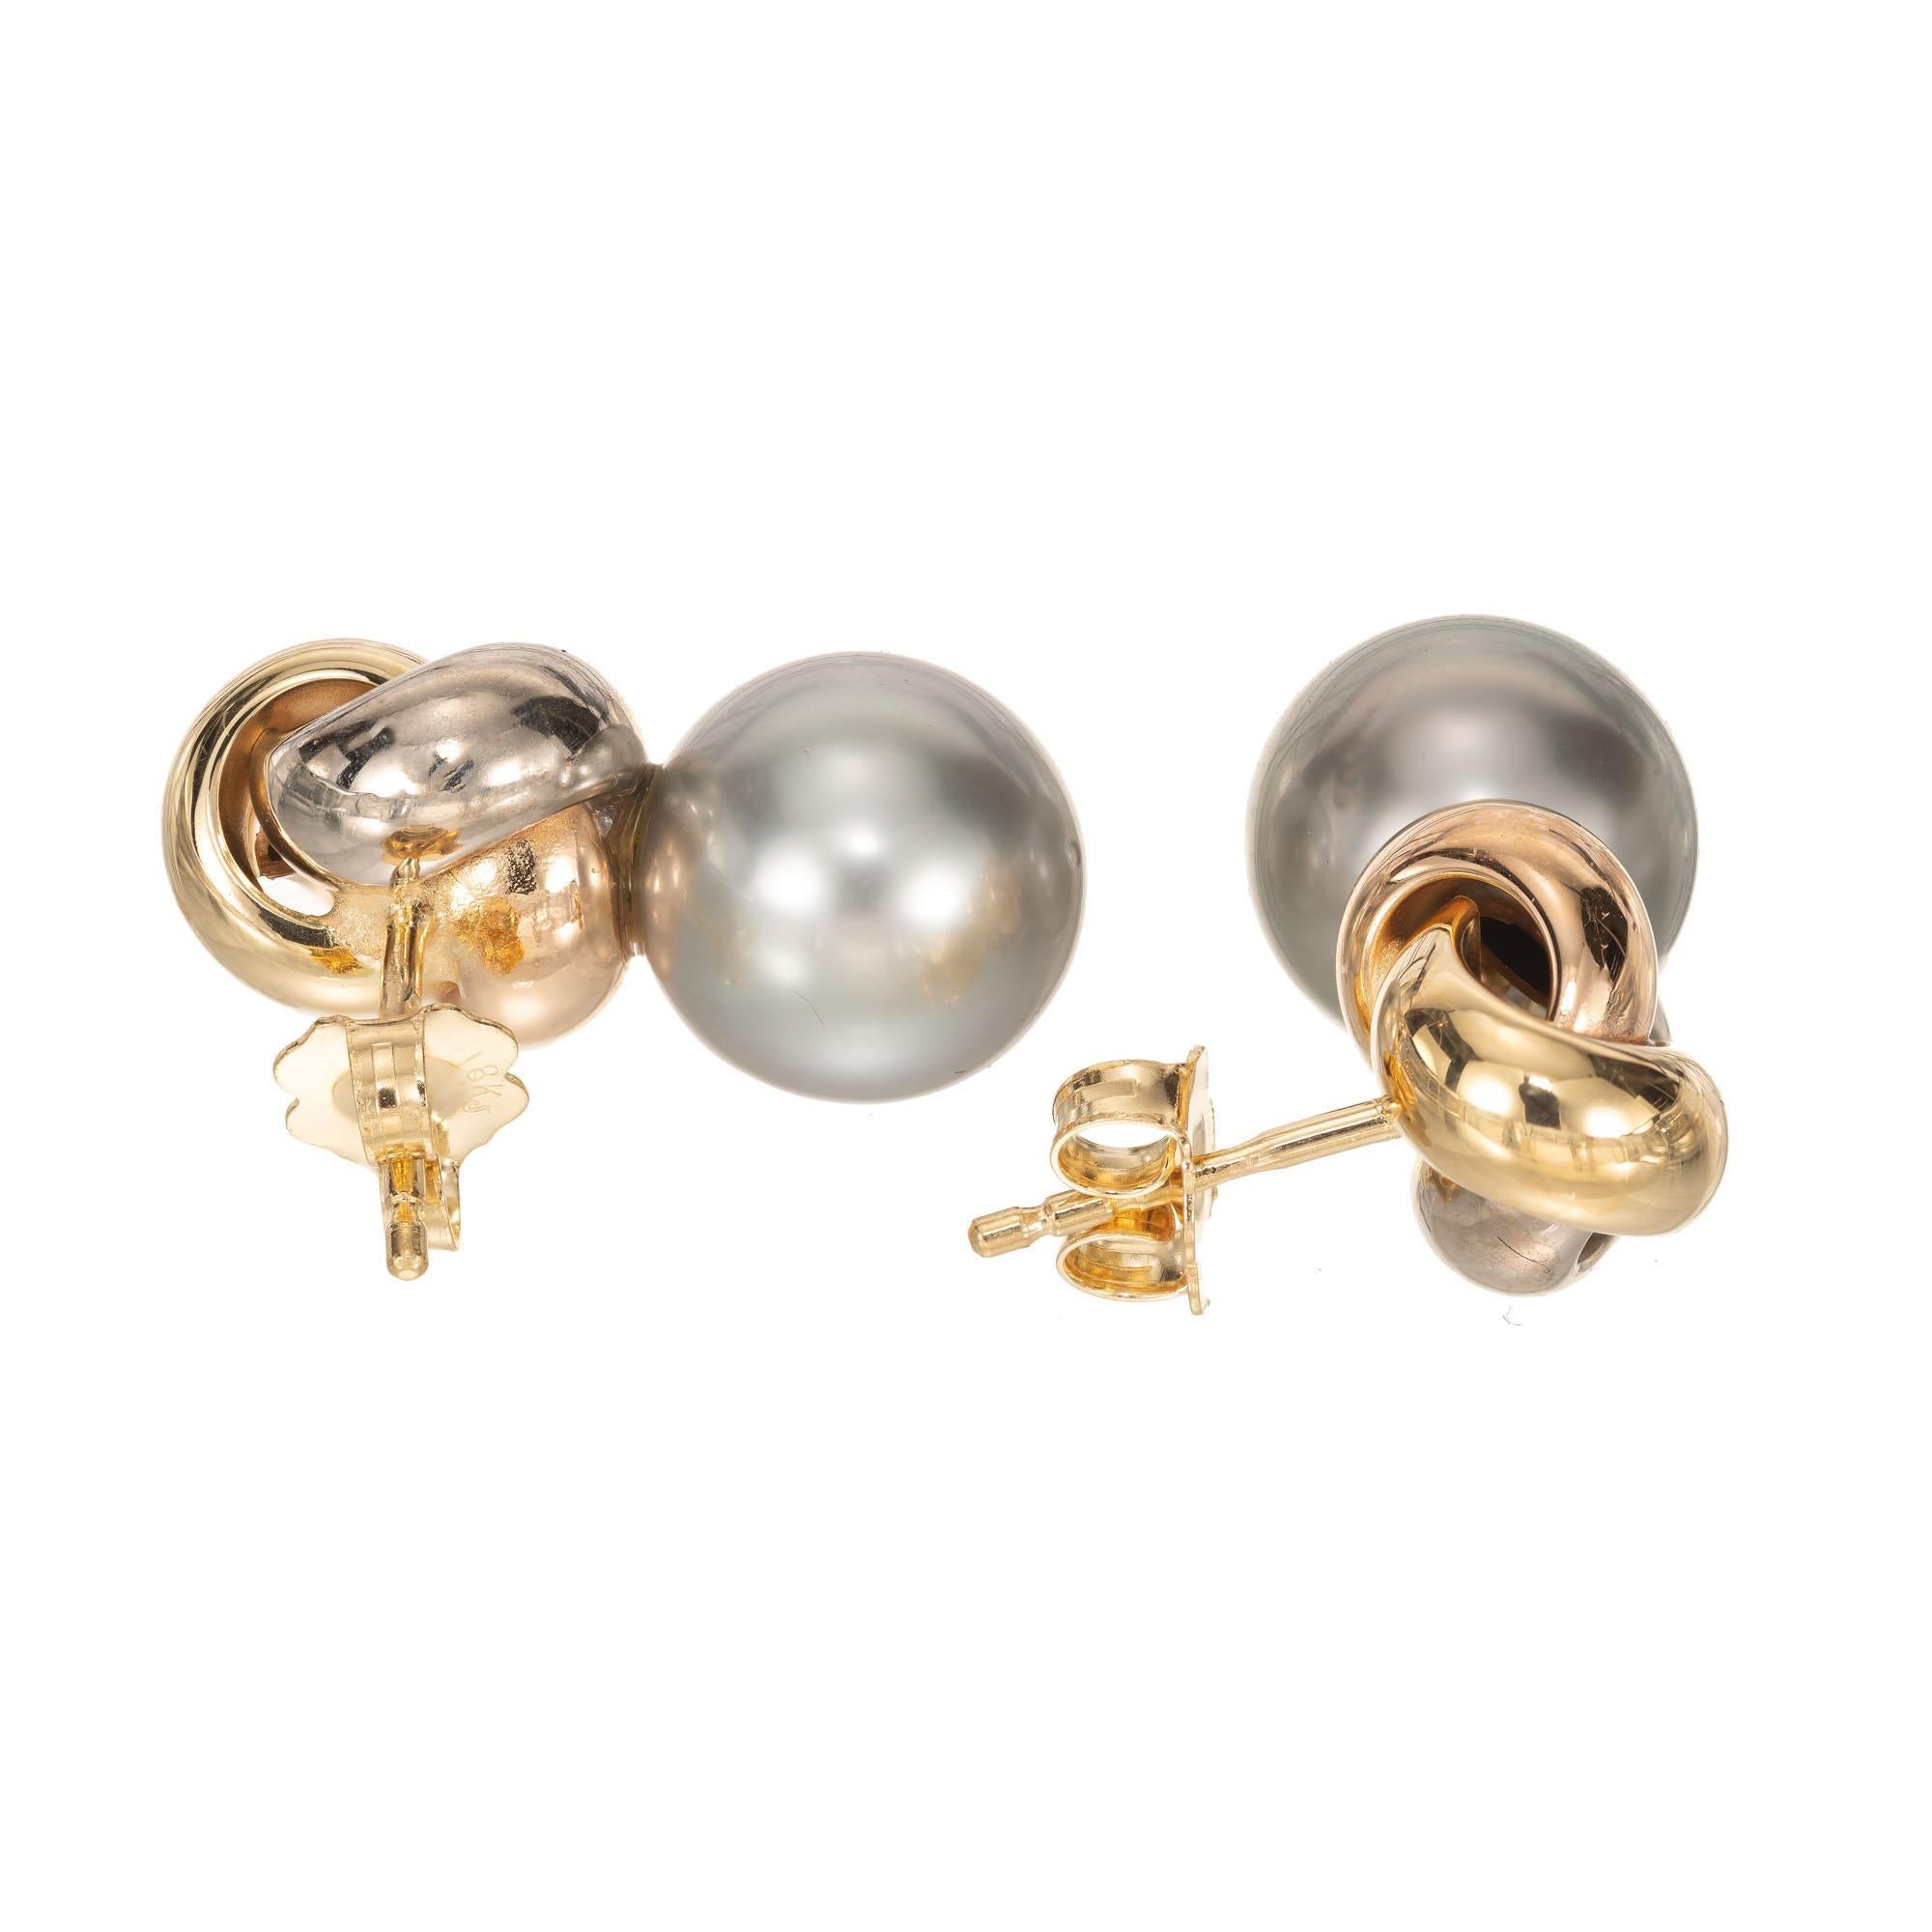 18k tri-color gold knot earrings in yellow, rose and white gold with a 10mm black South Sea Cultured Pearl set below. 

2 10mm South Sea cultured Pearls
6.9 grams
Tested: 18k
Stamped: 750
Hallmark: HS
Top to bottom: 20.04mm or .79 inch
Width: